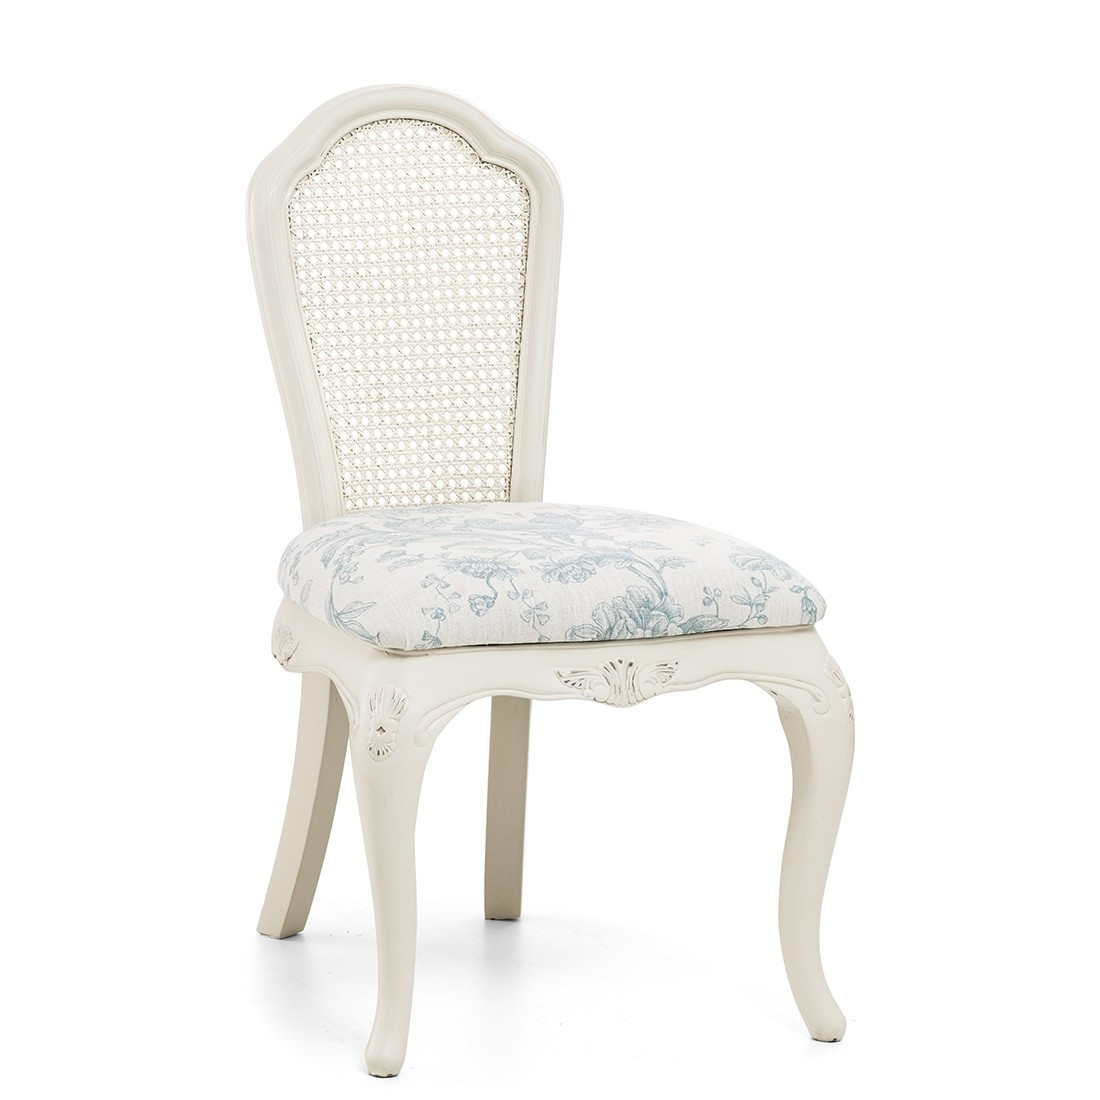 Small Upholstered Chair For Bedroom
 Ivory Upholstered French Bedroom Chair Crown French